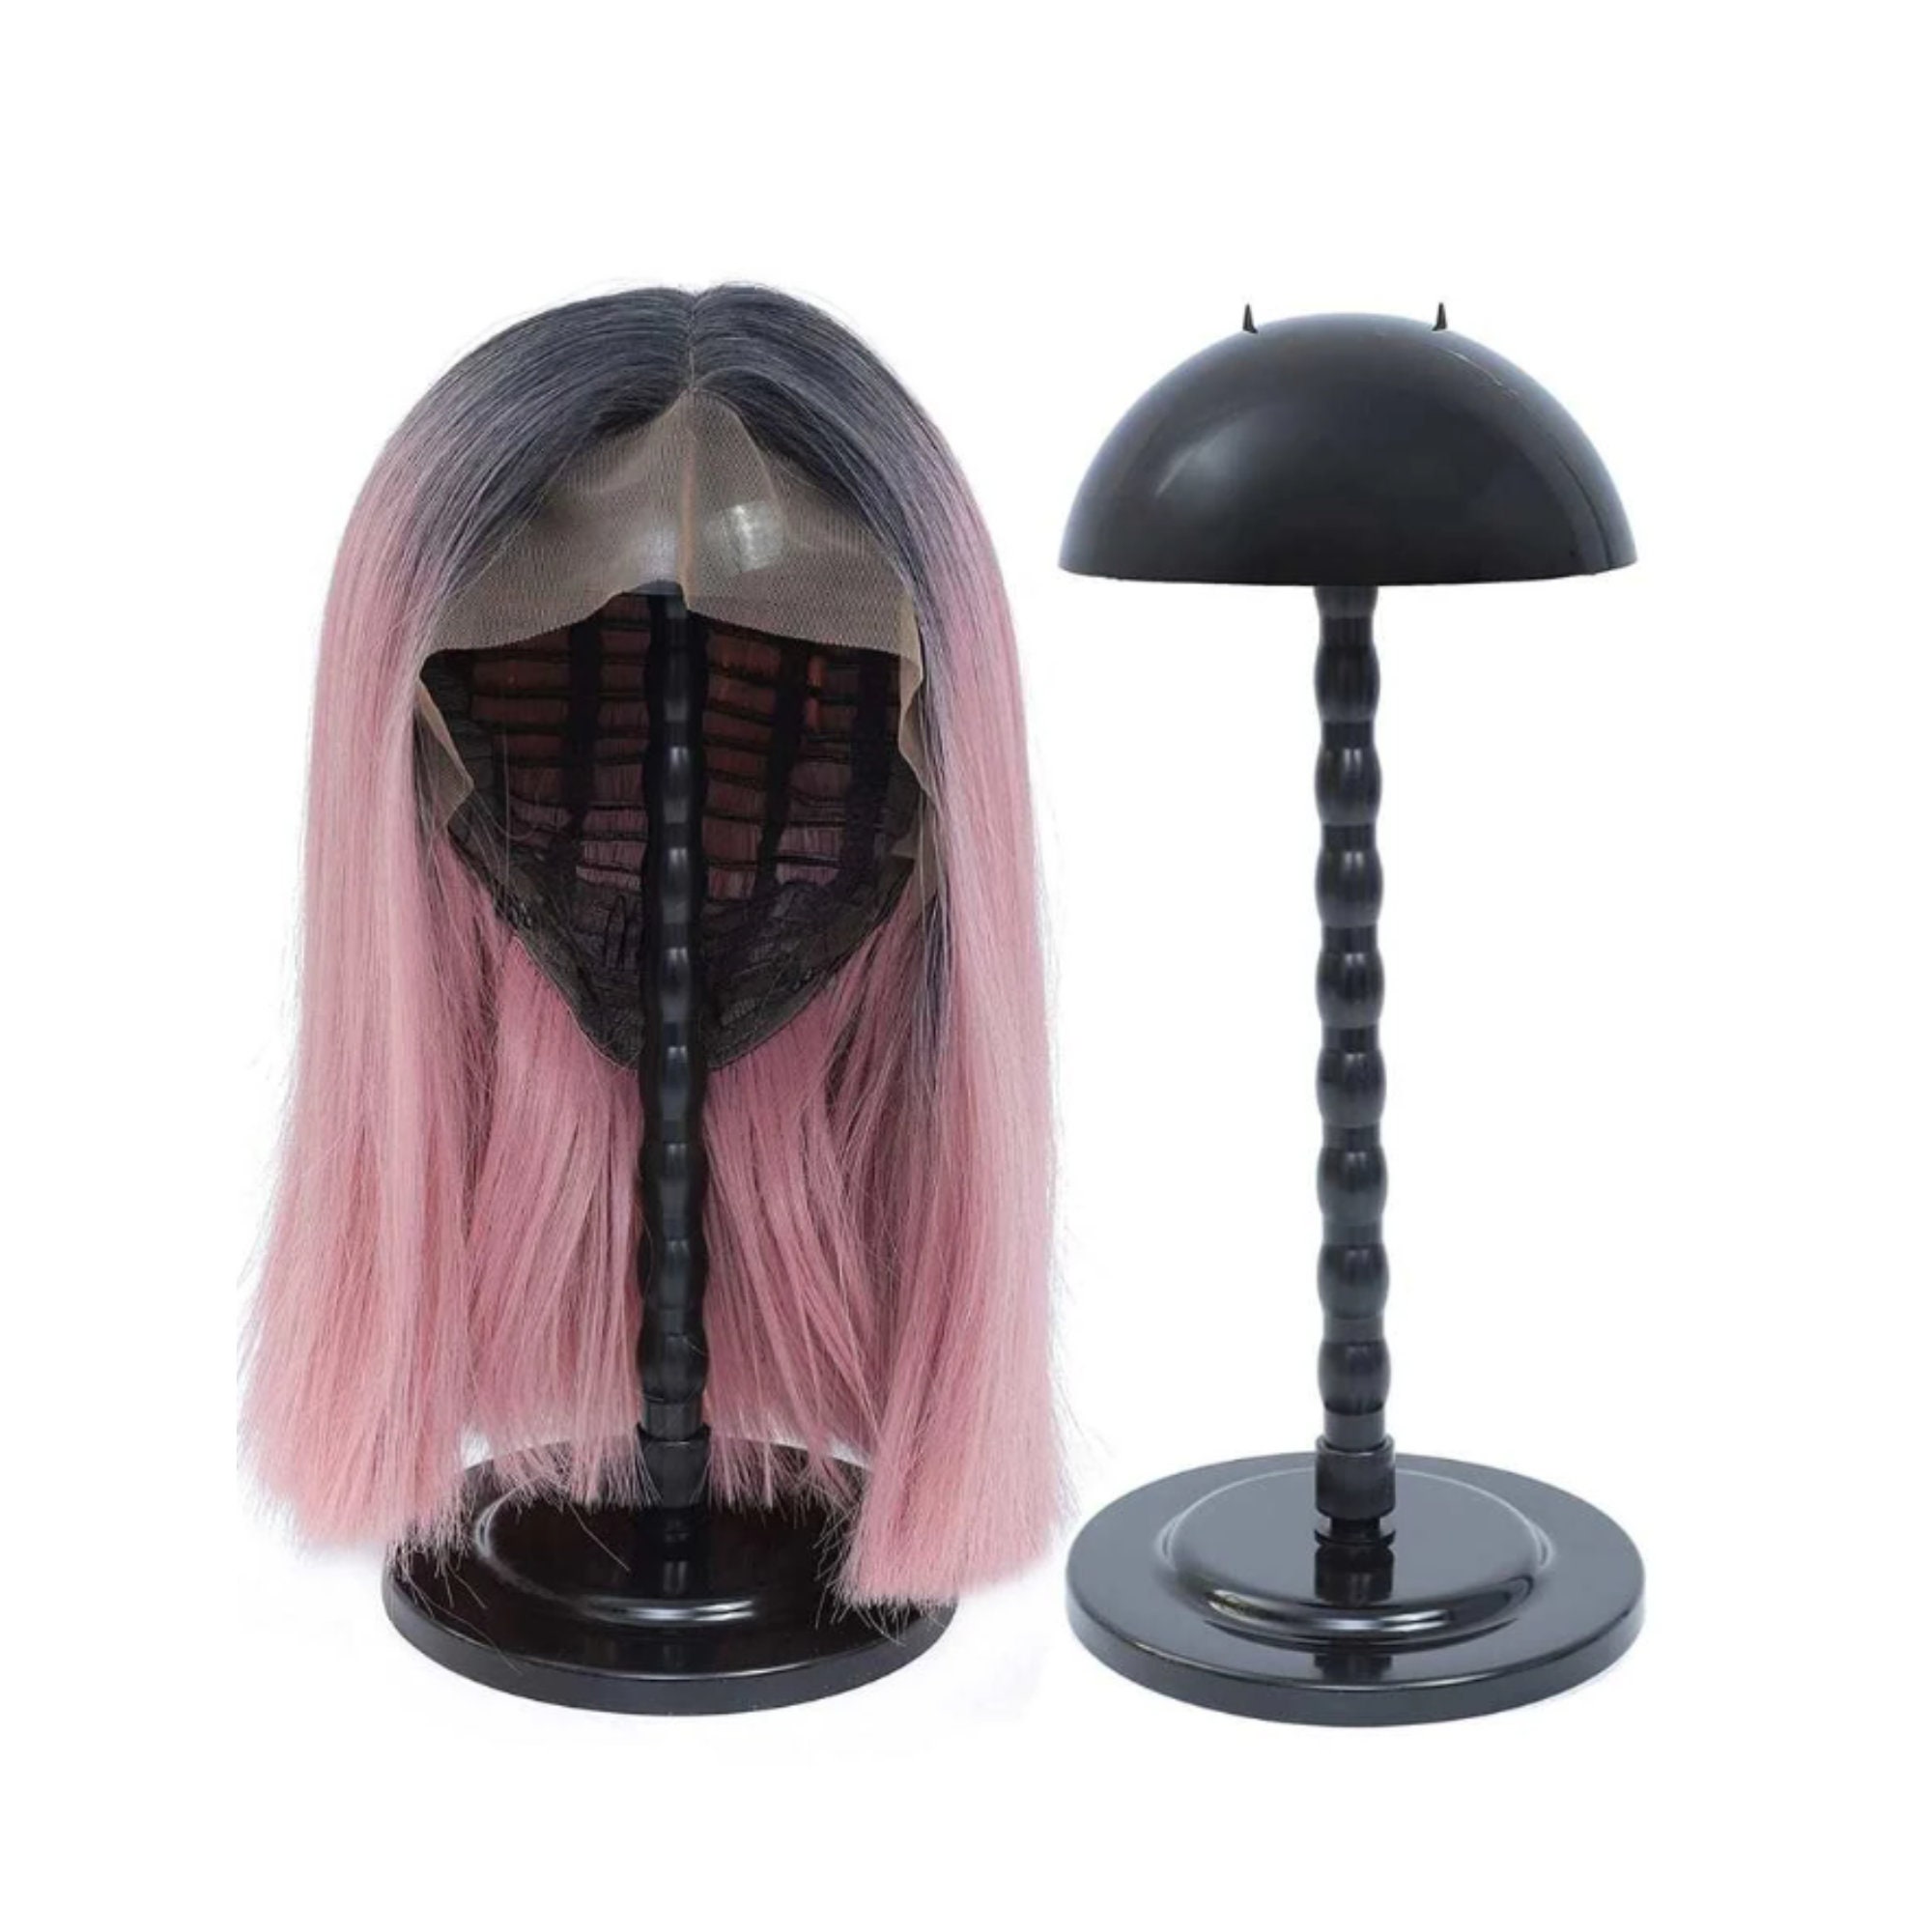  Wig Stand Pink 1PC Adjustable Height Portable Wig